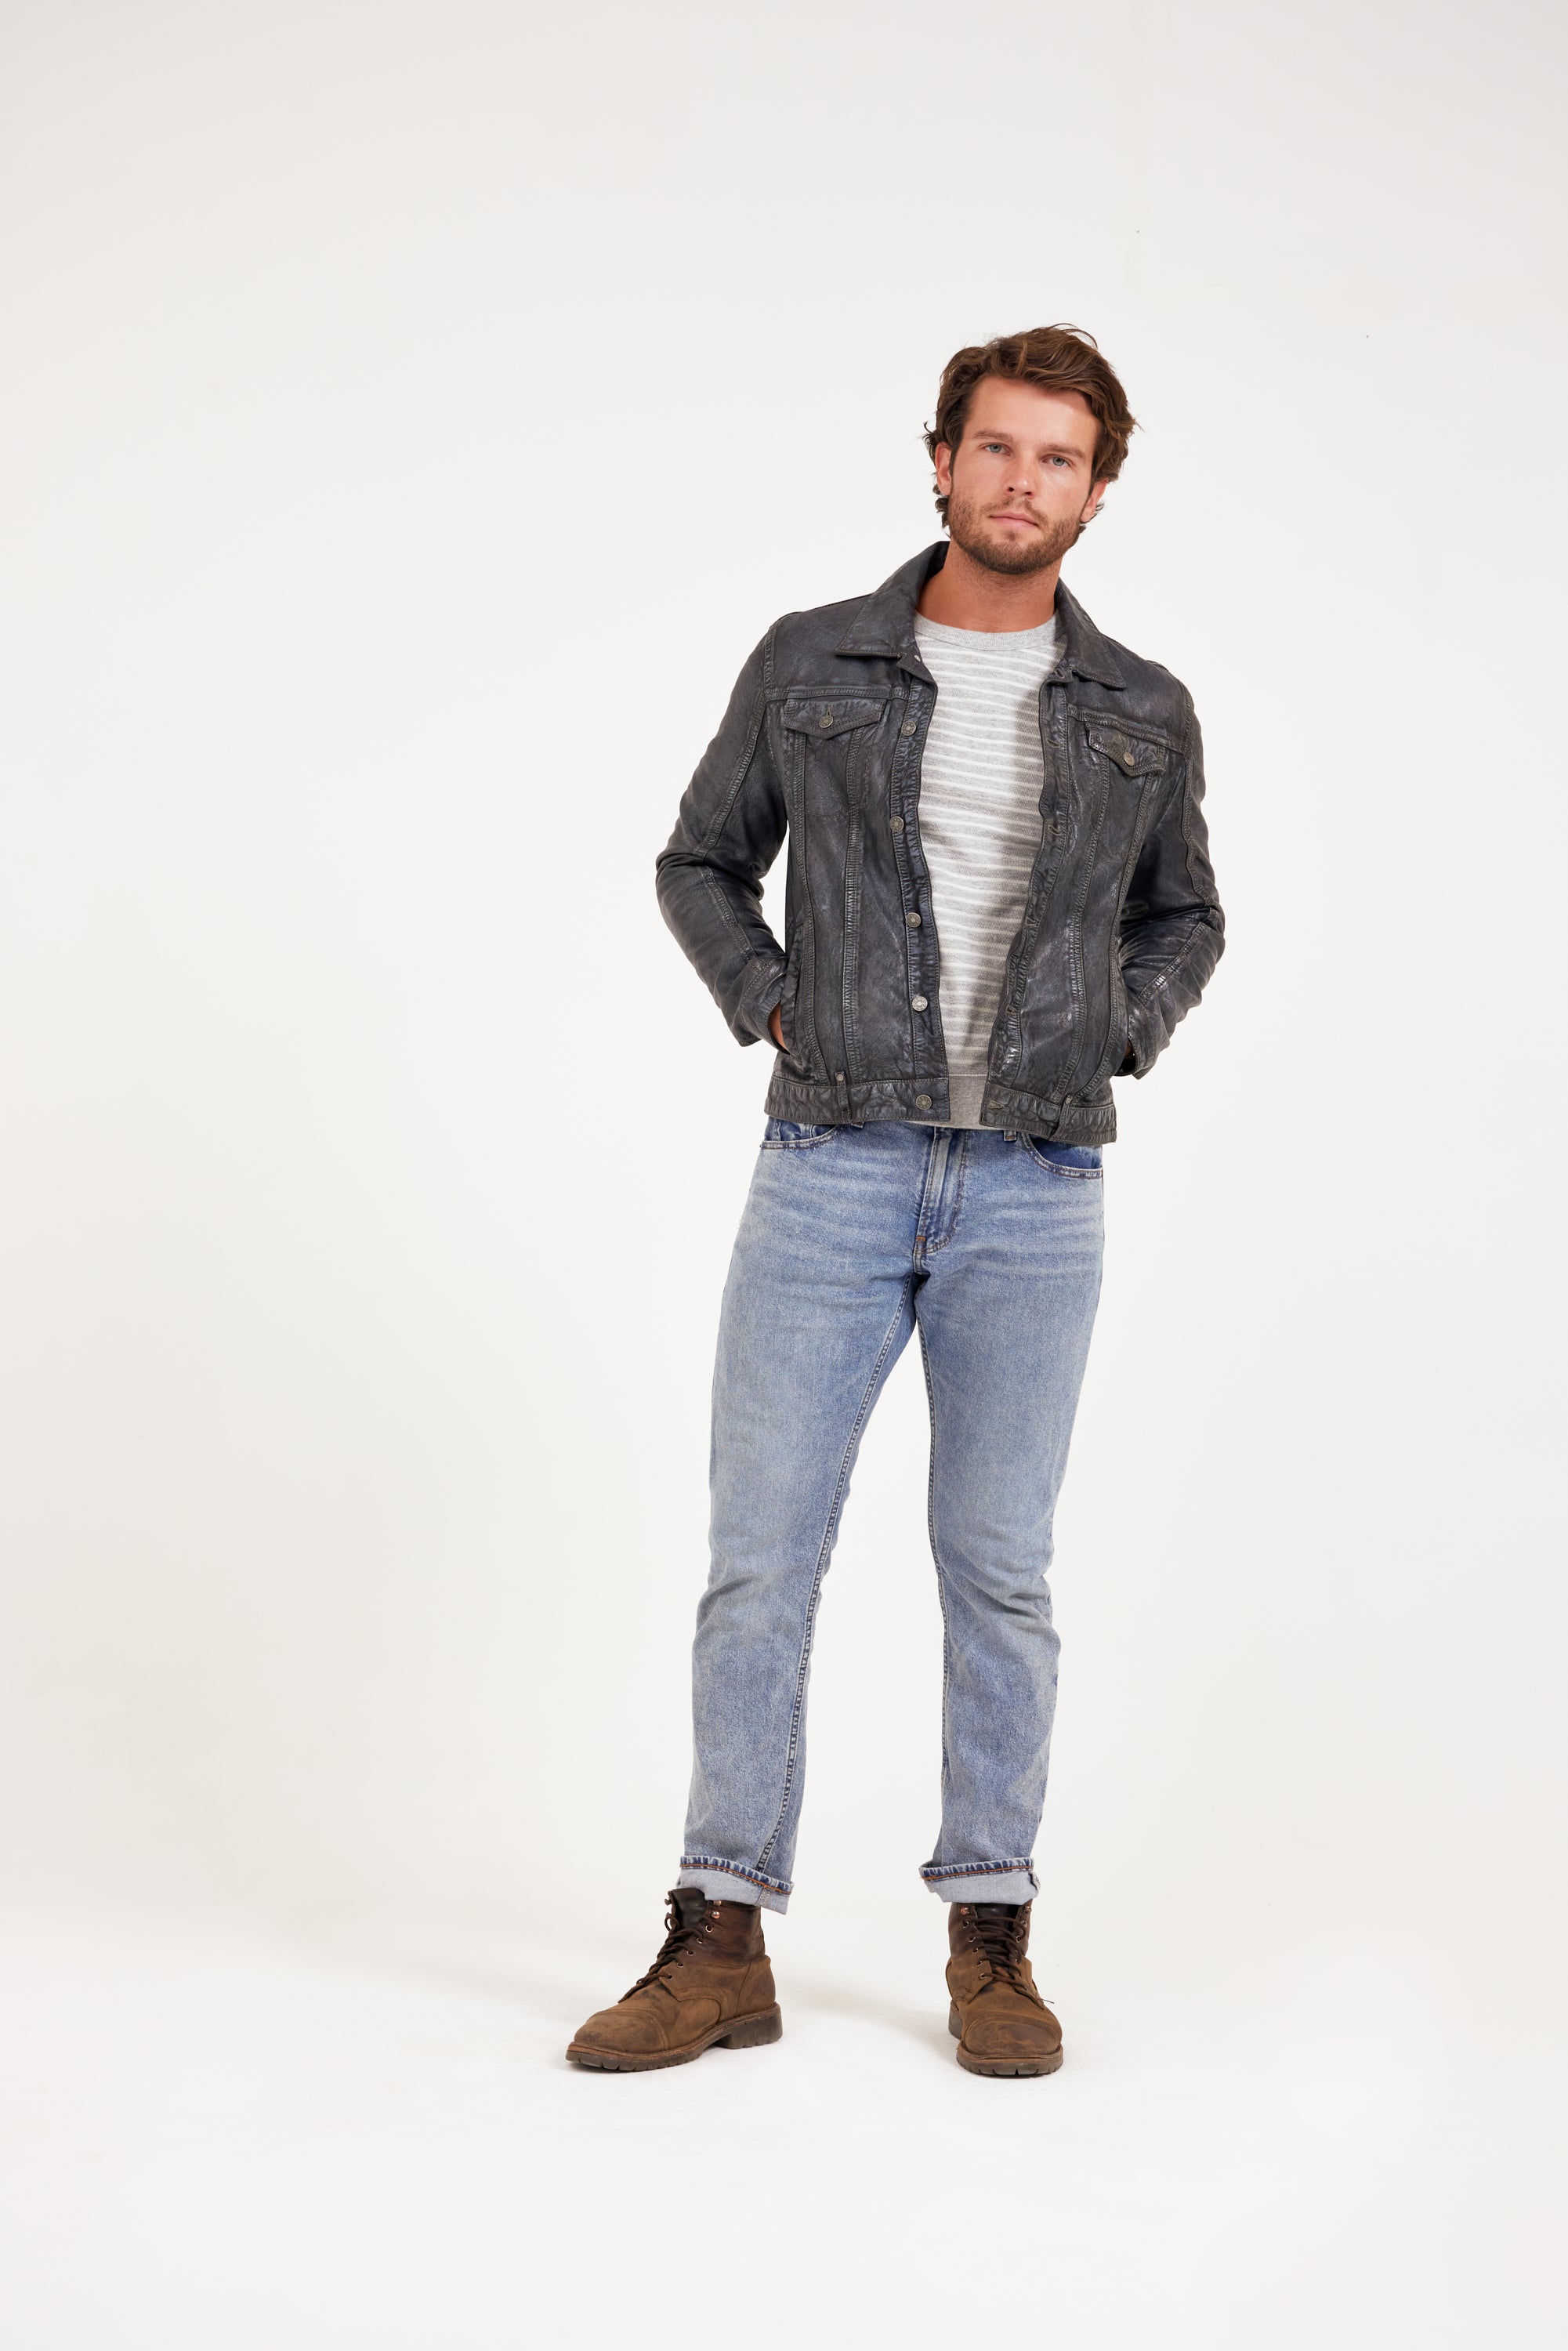 Geoff RF Leather mauritiusleather Anthracite-Blue – Jacket